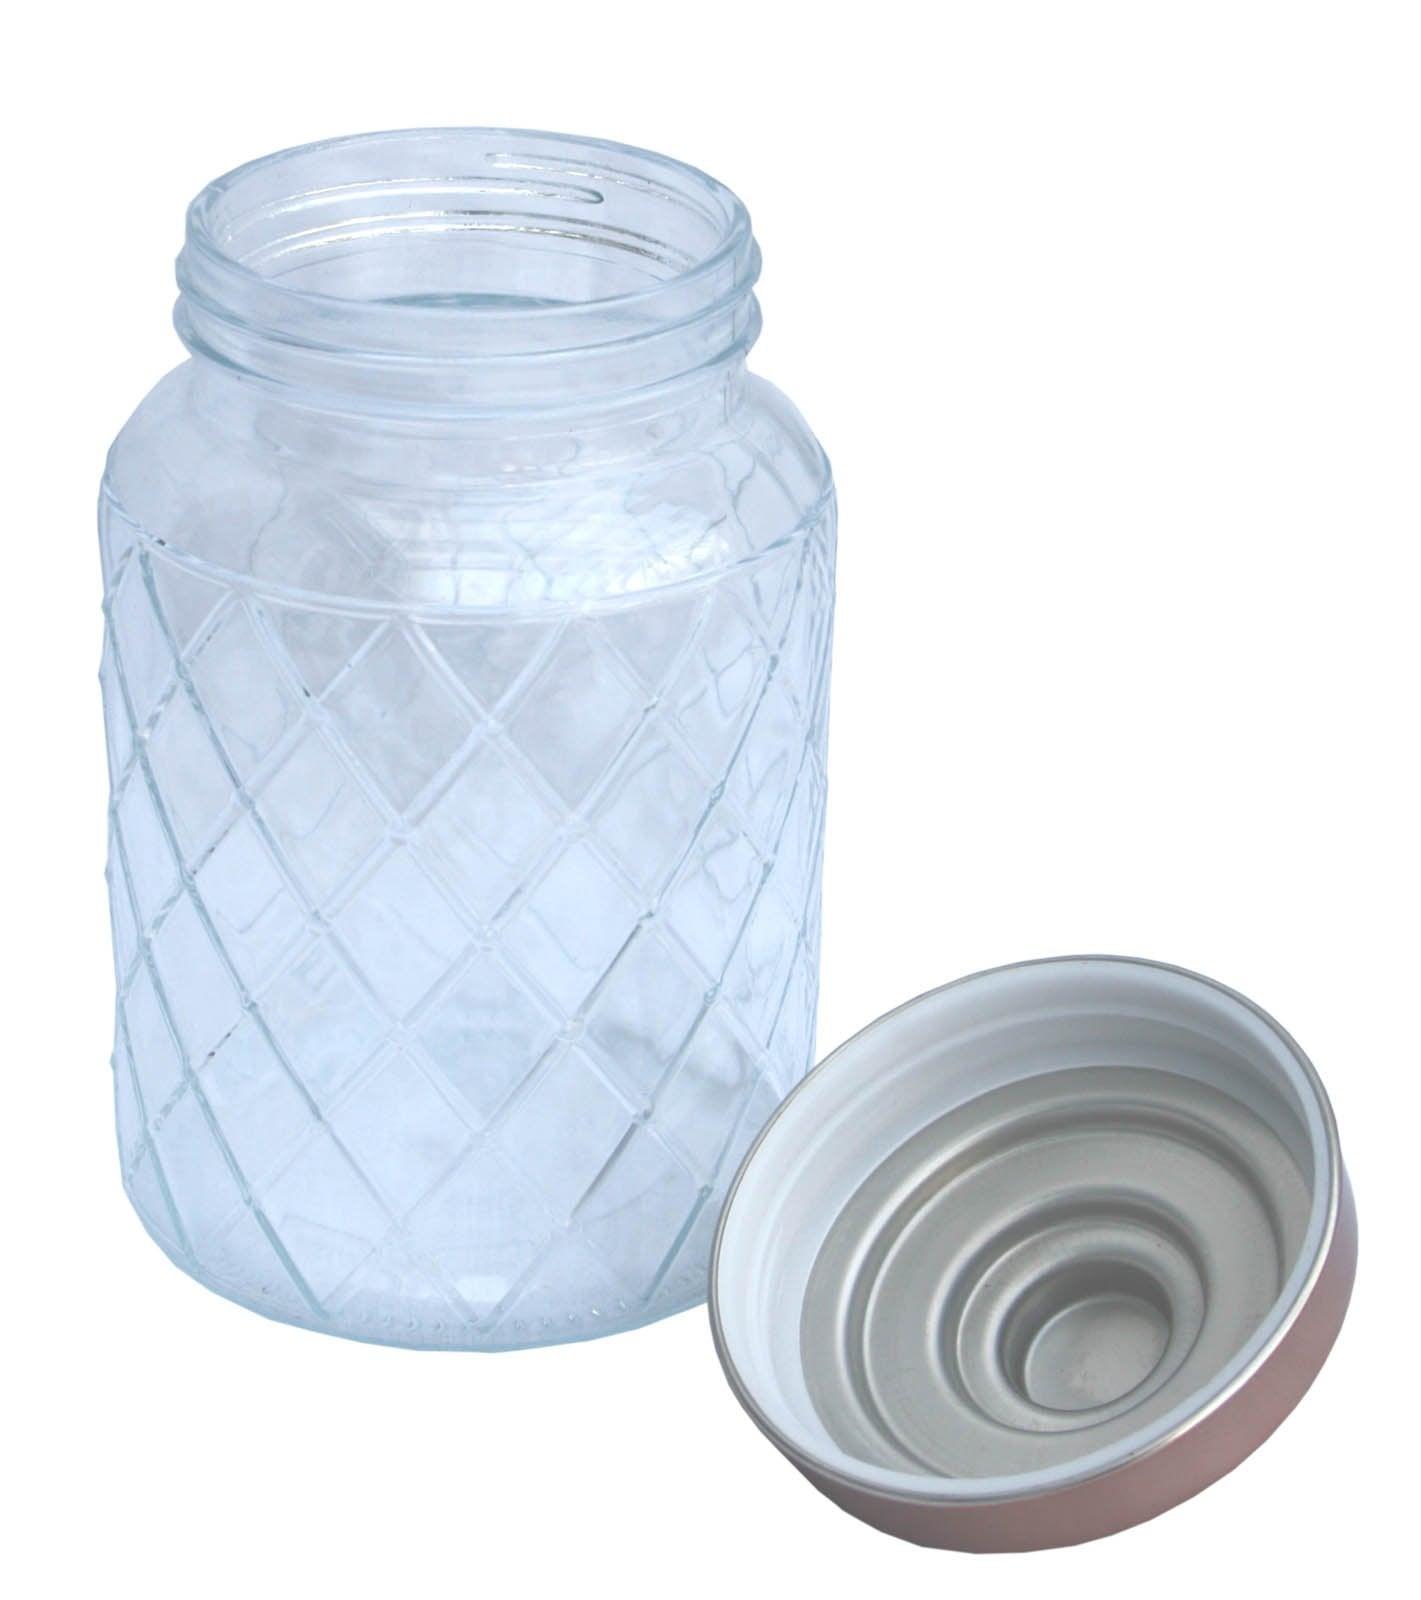 View Round Glass Jar With Copper Lid 7 Inch information